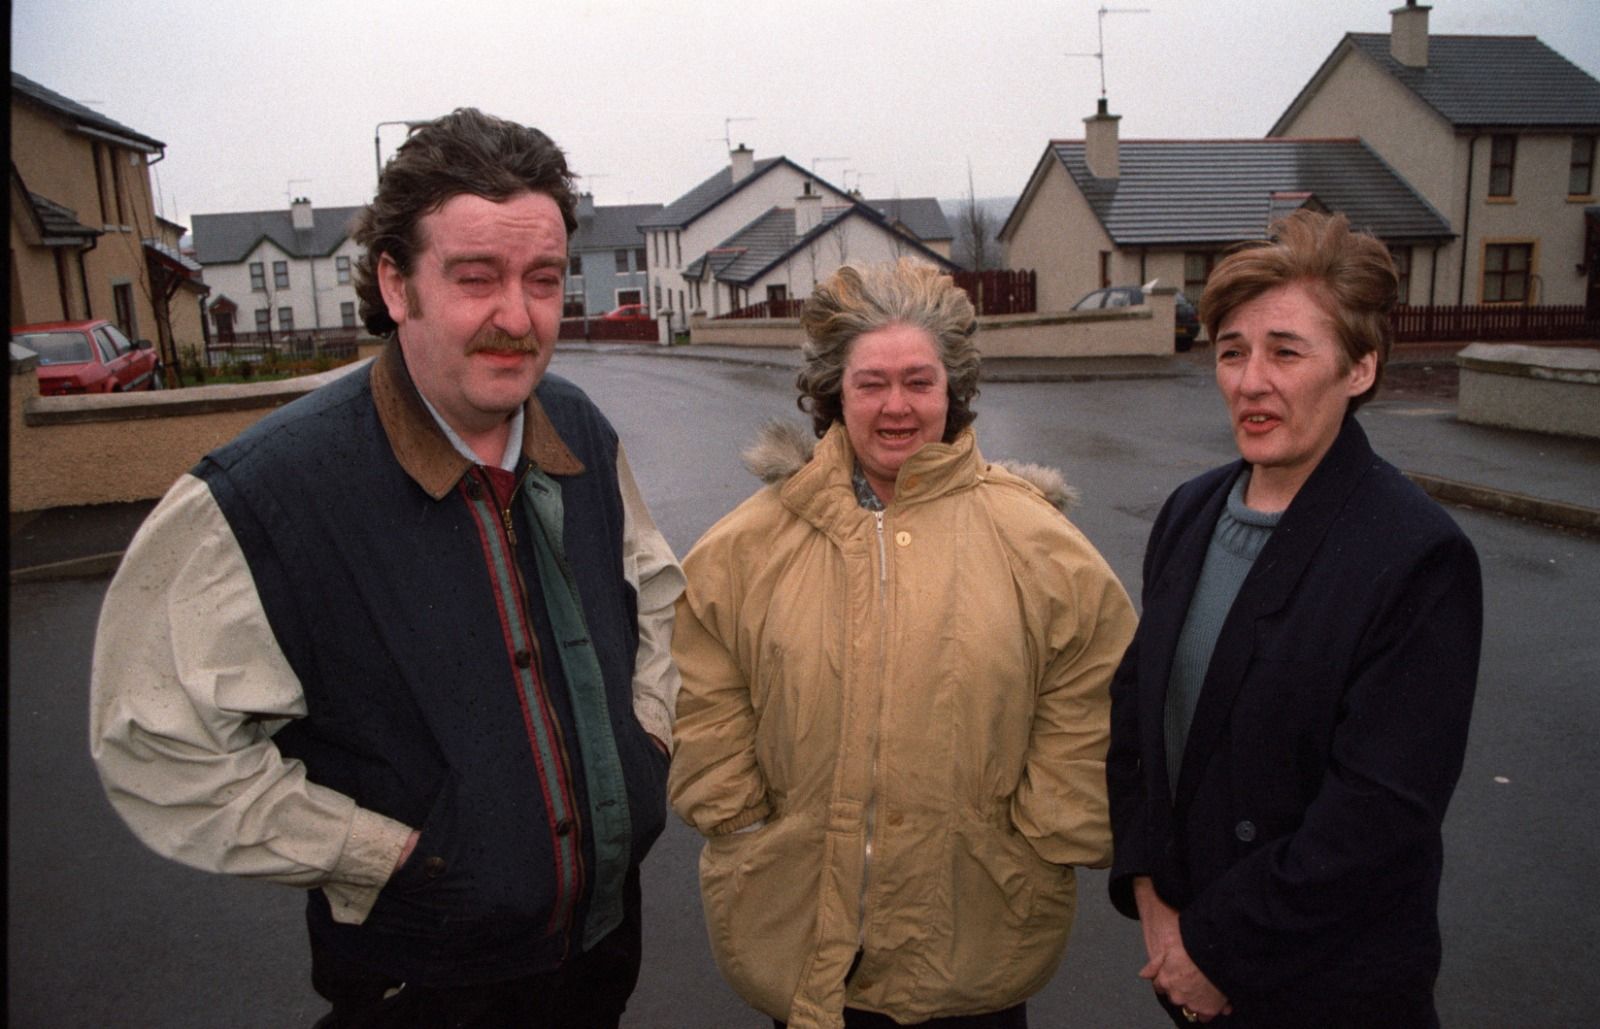 REMEMBERED: Shiela Adams (centre) with Lagmore residents Richard and Marie McCabe, protesting the lack of social amenities in the estate expansion plan in 1997